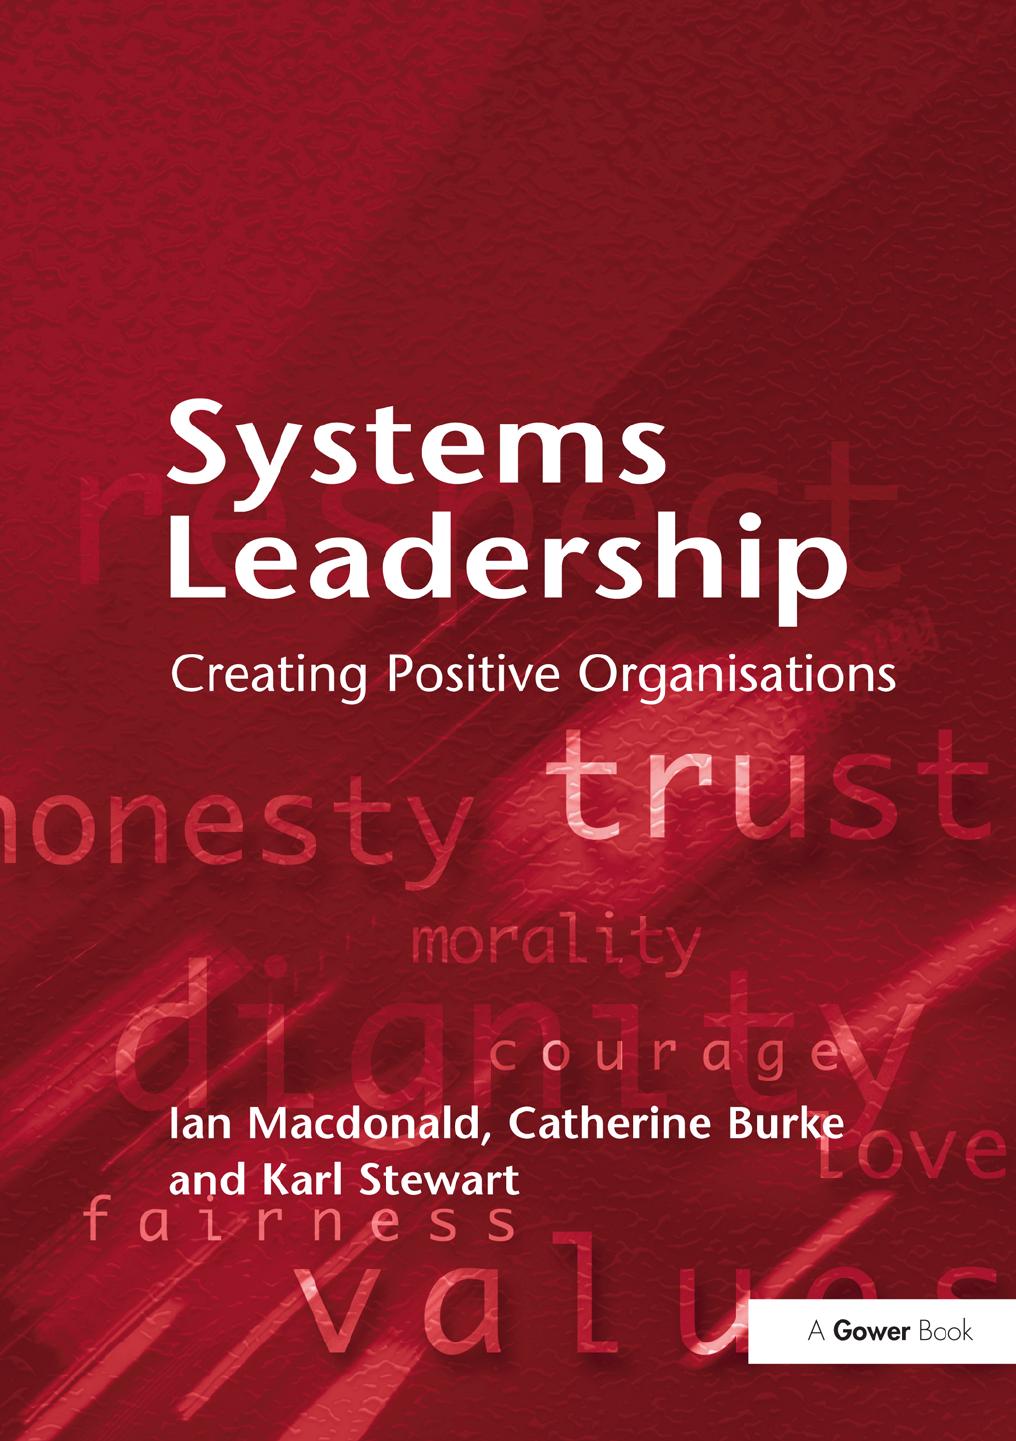 Systems Leadership: Creating Positive Organizations